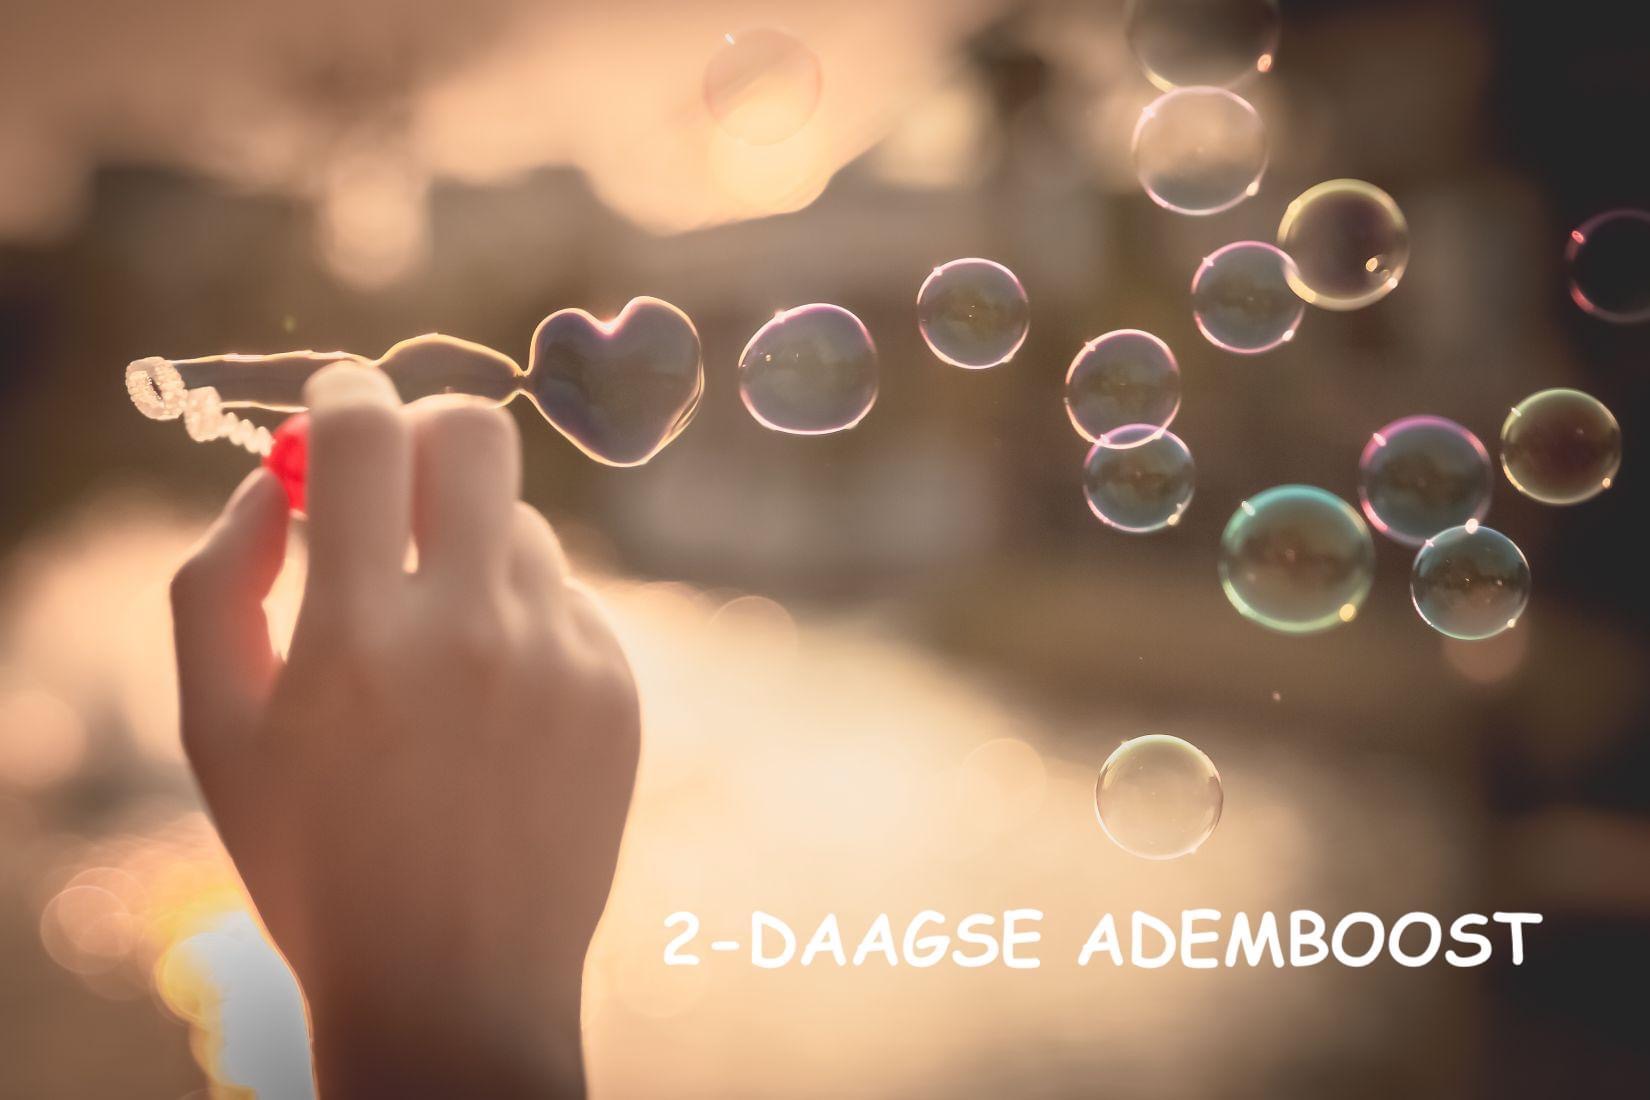 Ademboost- 2 daagse